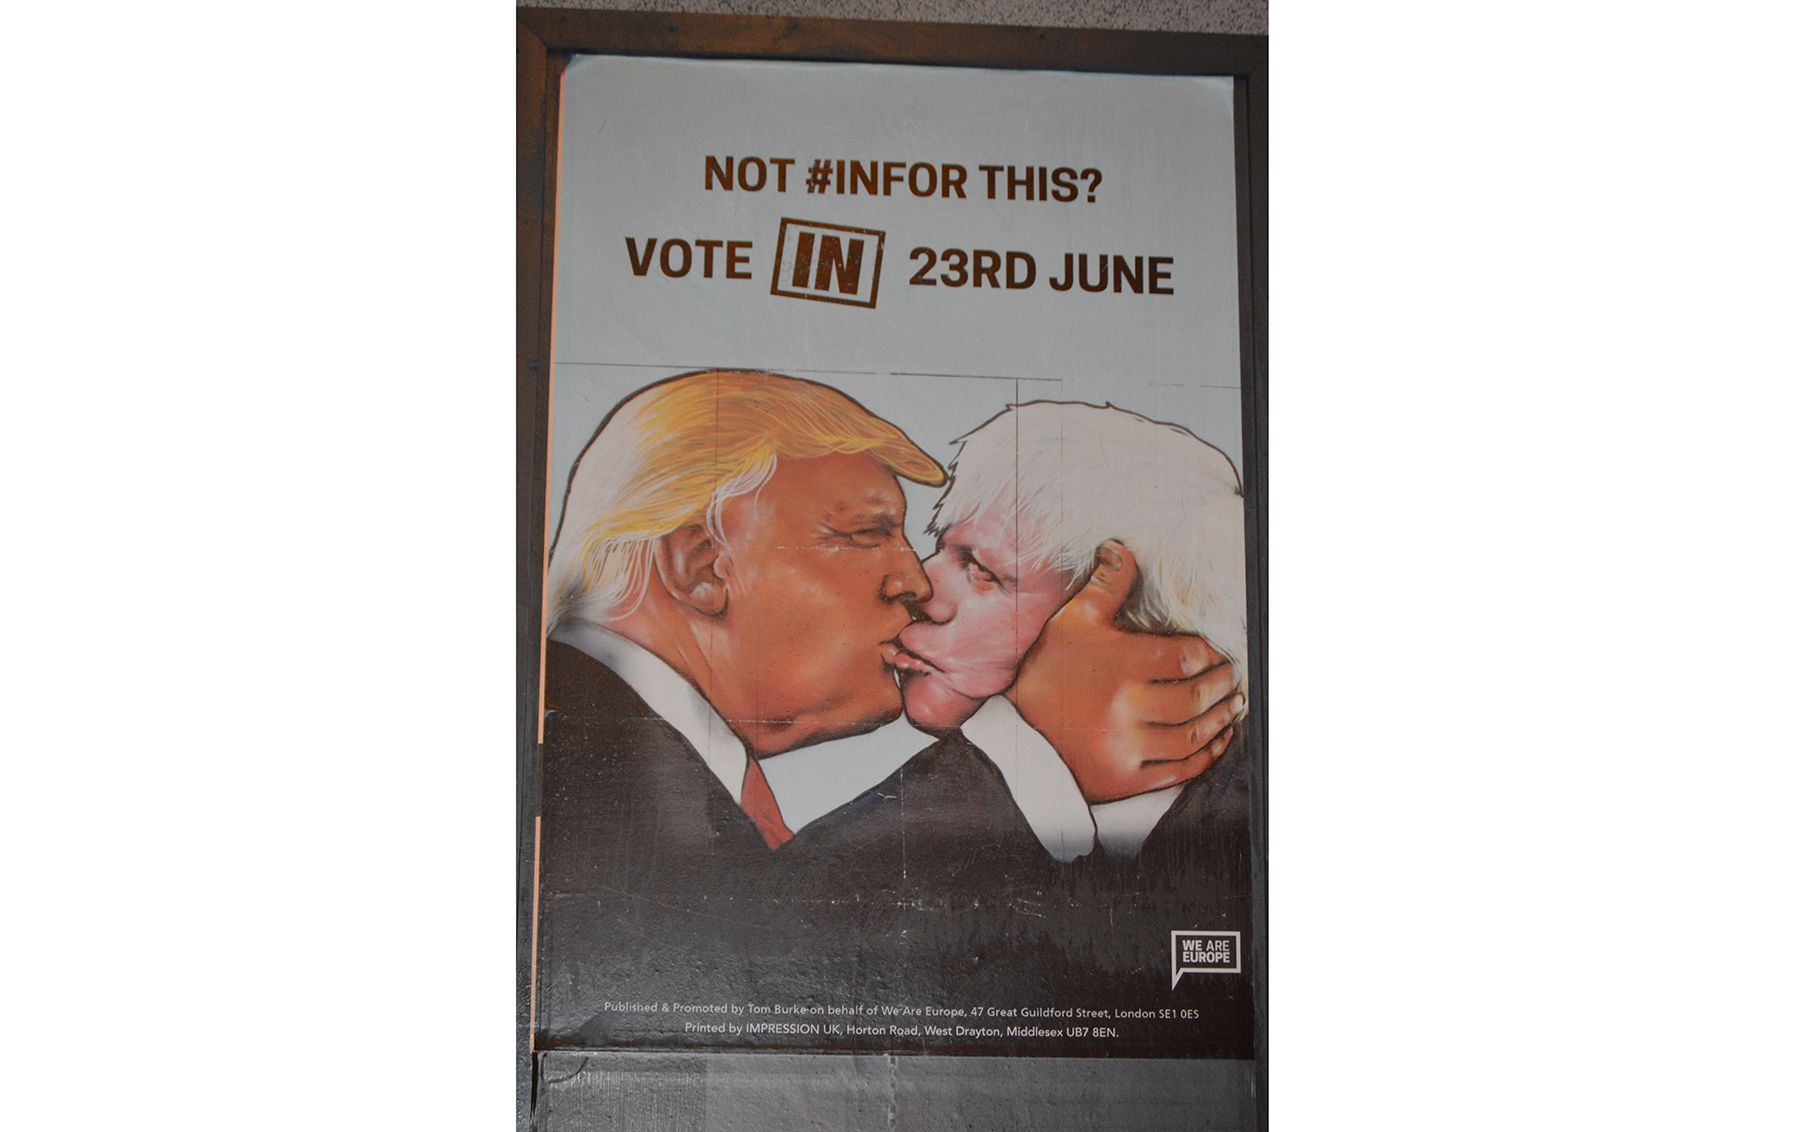 "We Are Europe" poster of Trump and Johnson kissing. Image by Amir Hassan. UK, 2016.